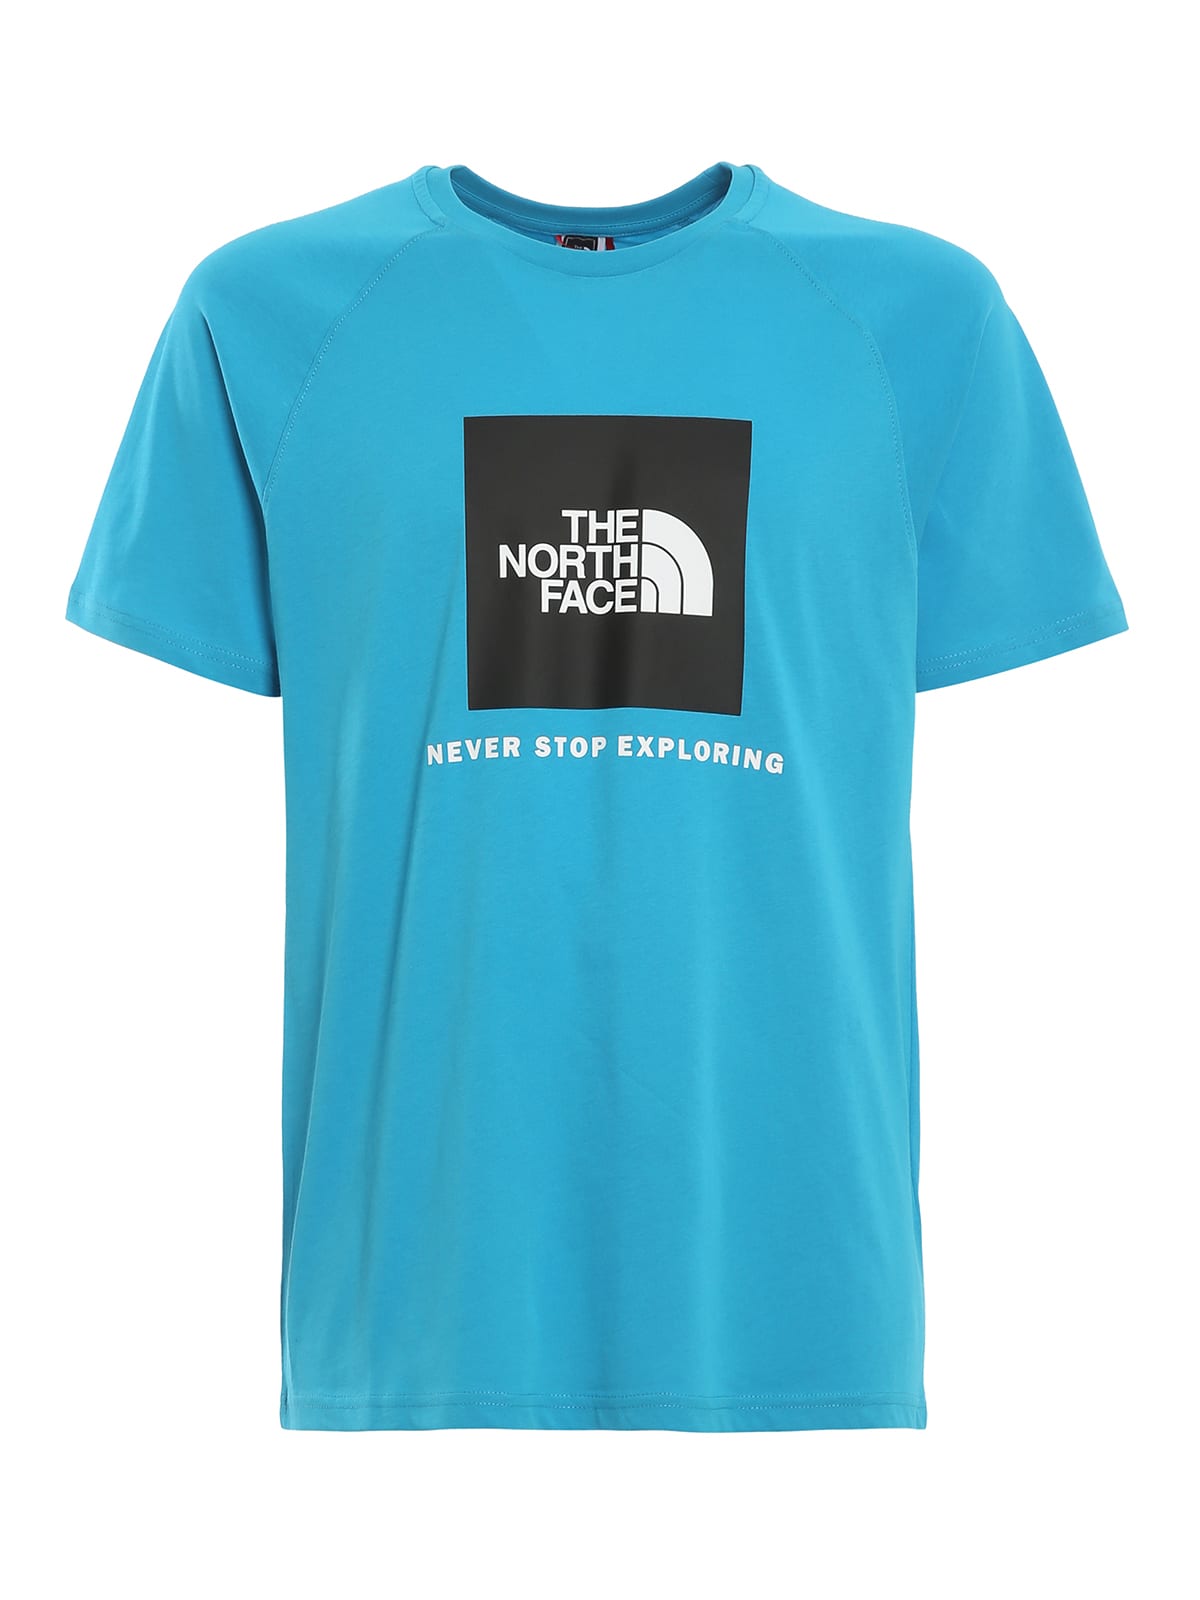 The North Face M Ss Rag Red Box Tee